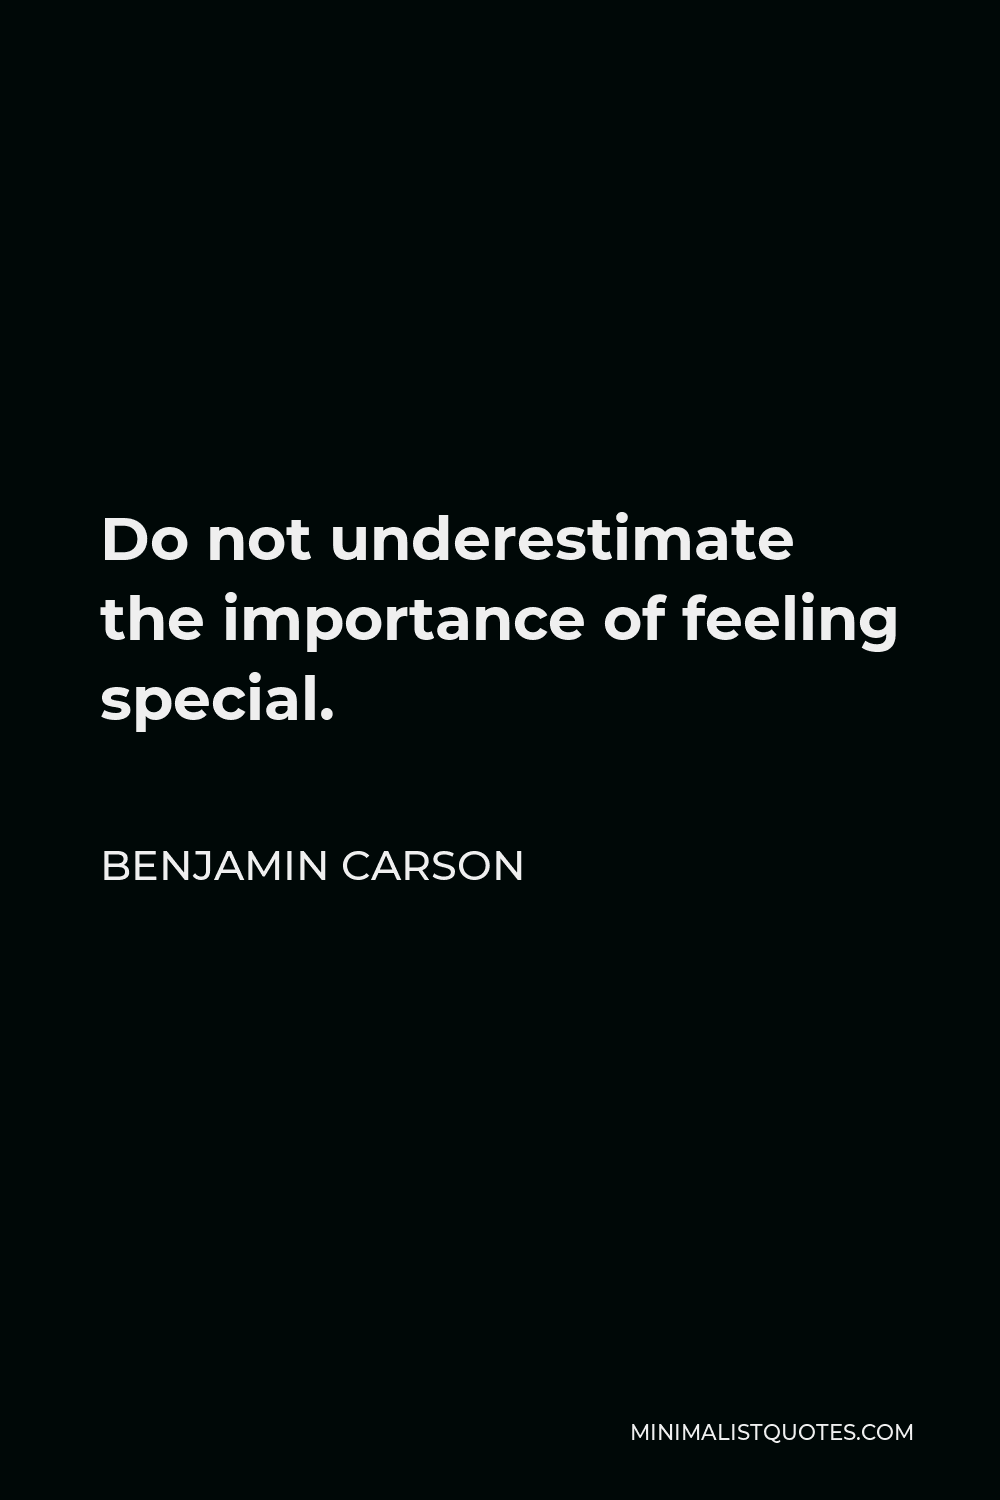 Benjamin Carson Quote - Do not underestimate the importance of feeling special.